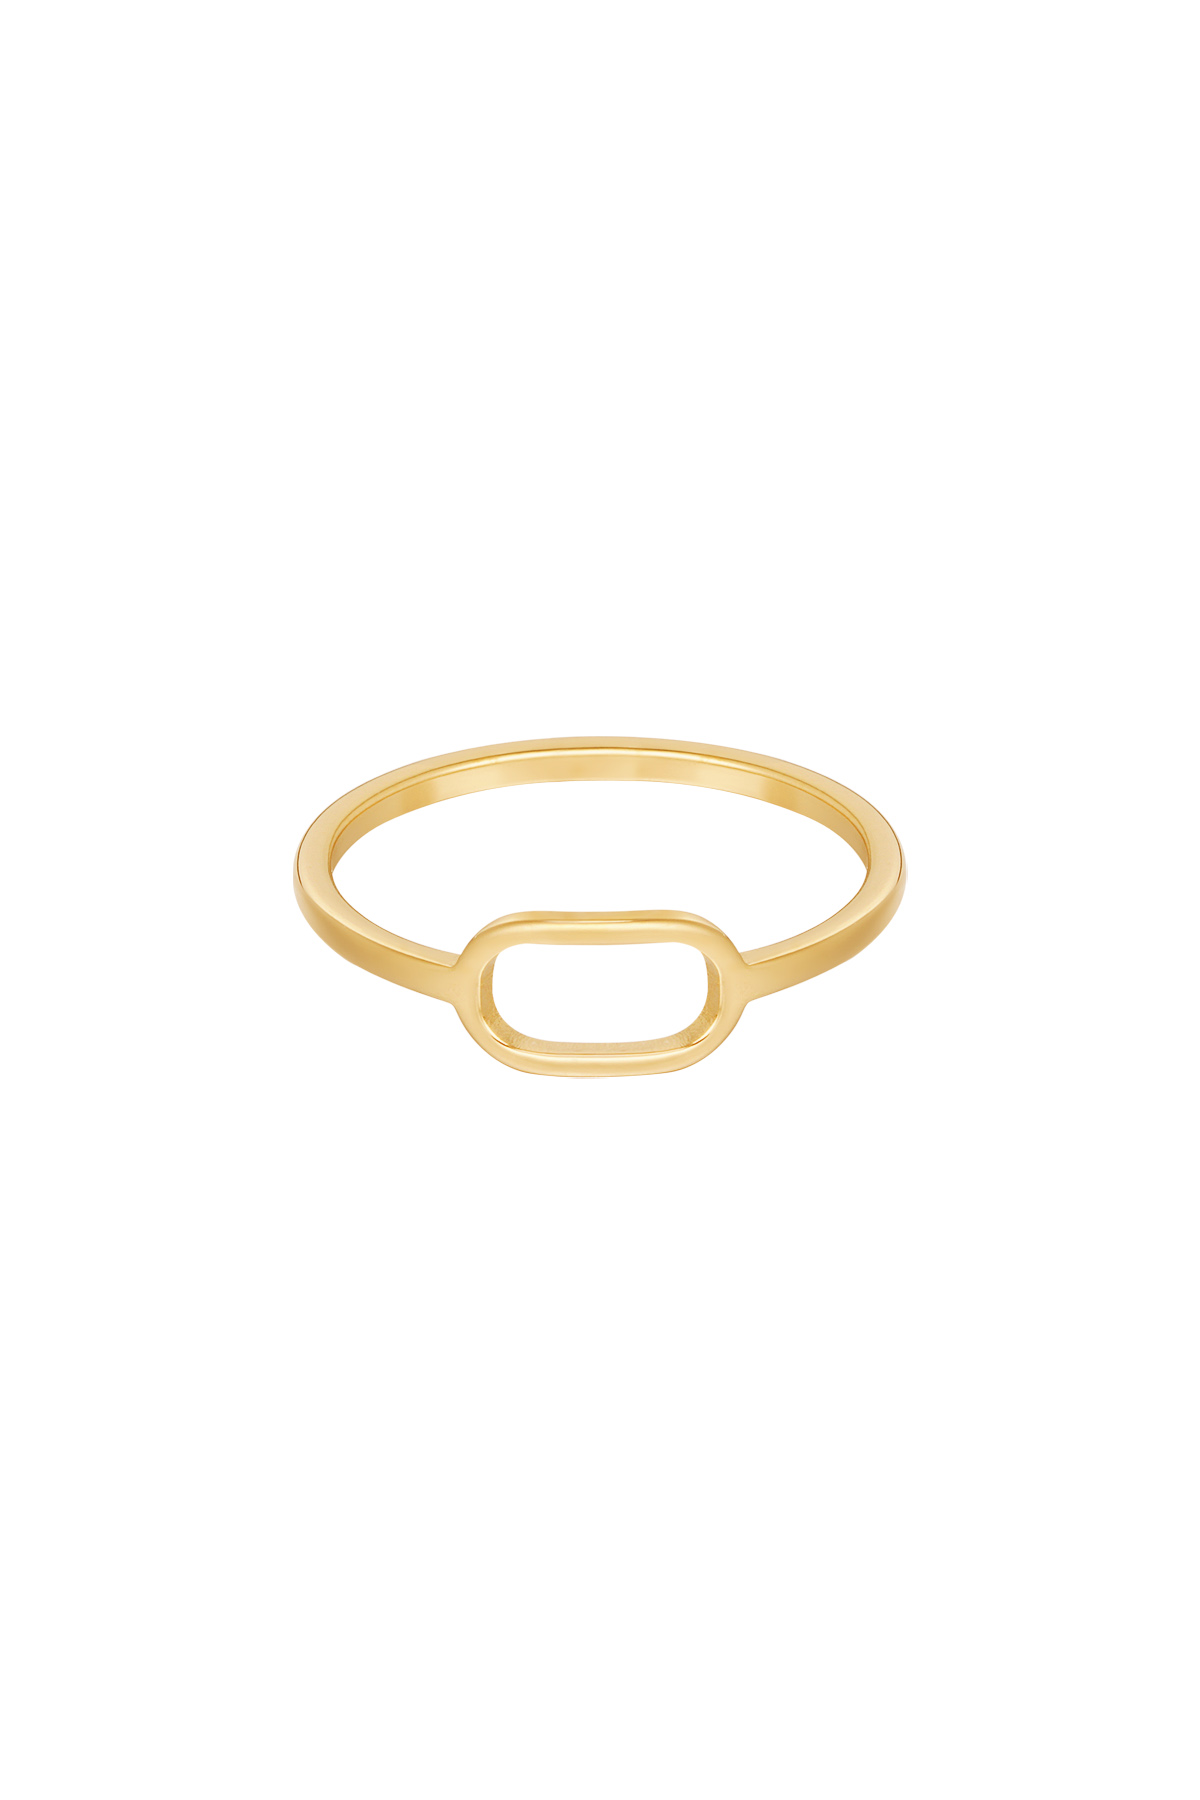 Ring cut out - gold 